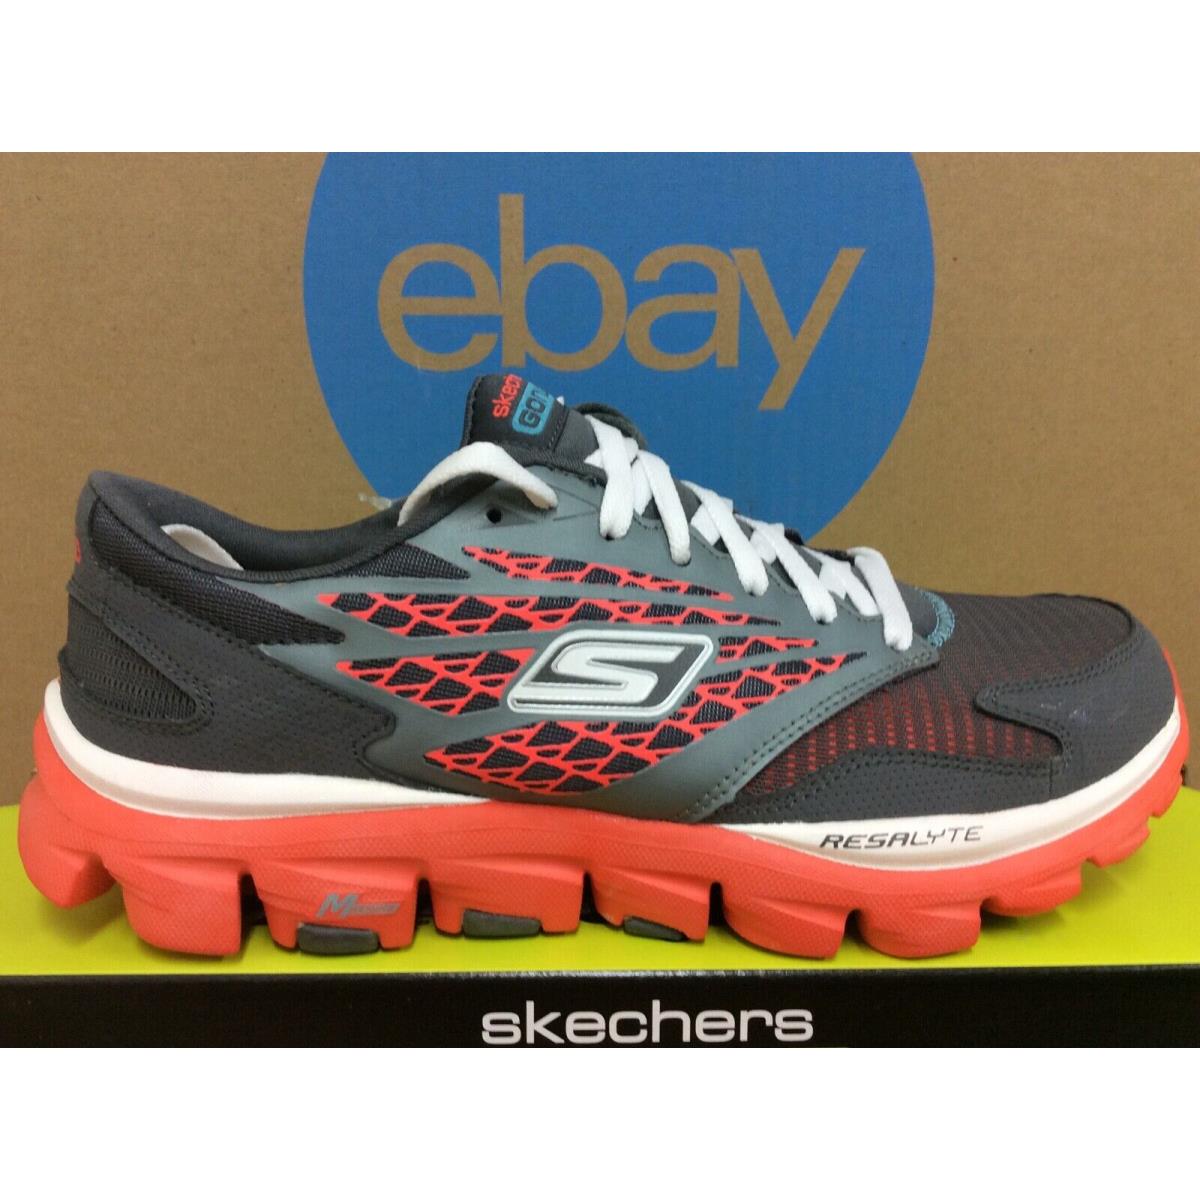 Skechers shoes Run Ride - Charcoal Coral 5